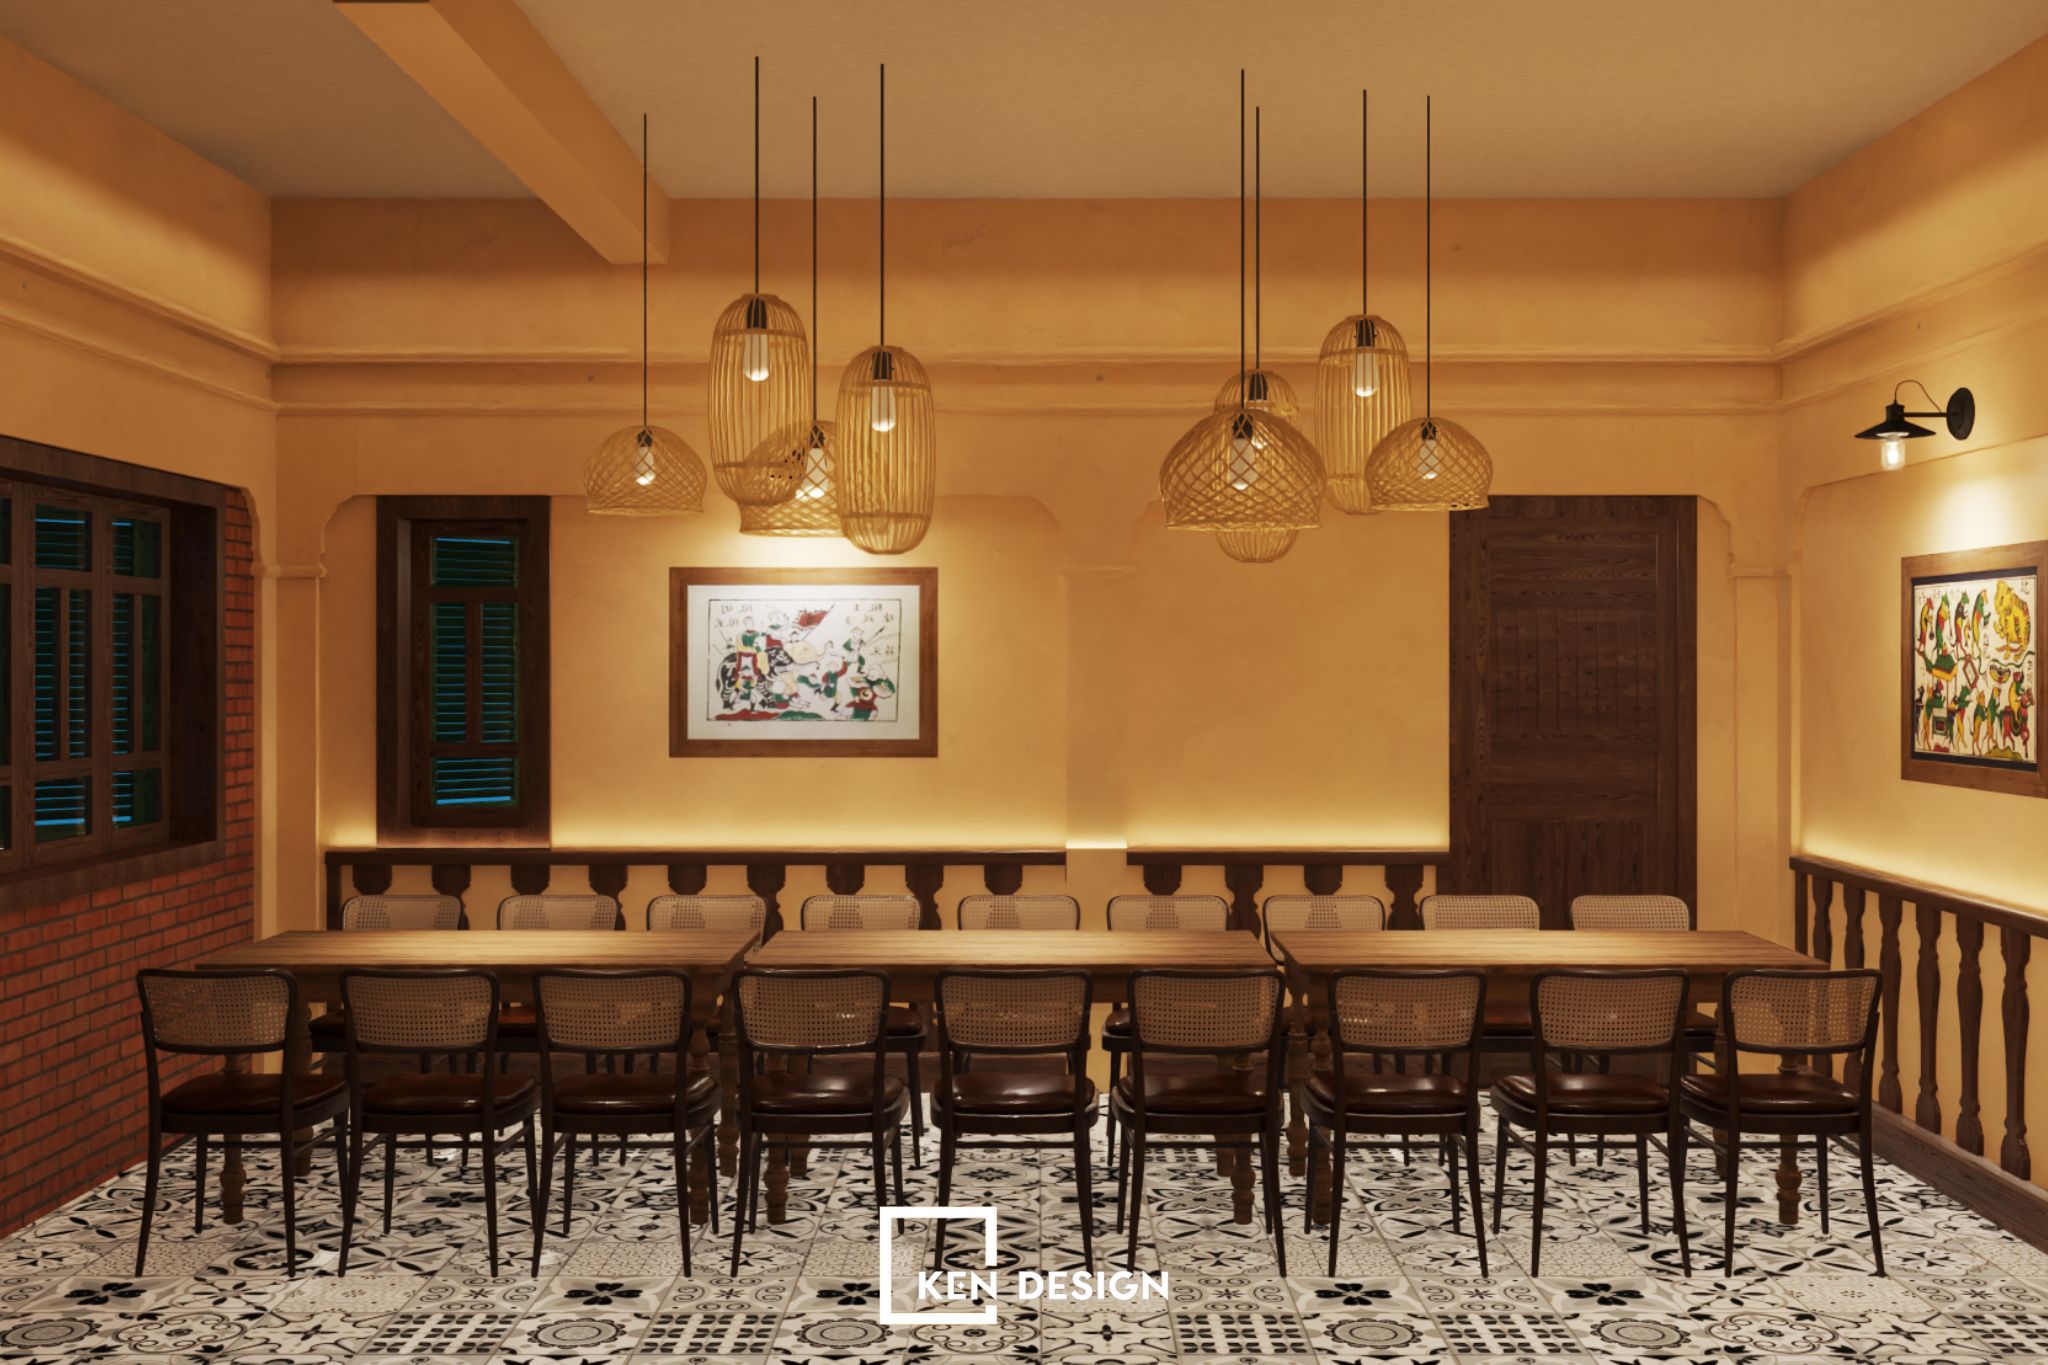 The Design of Hai Mien Tay Restaurant - Trung HoaThe Design of Hai Mien Tay Restaurant - Trung Hoa